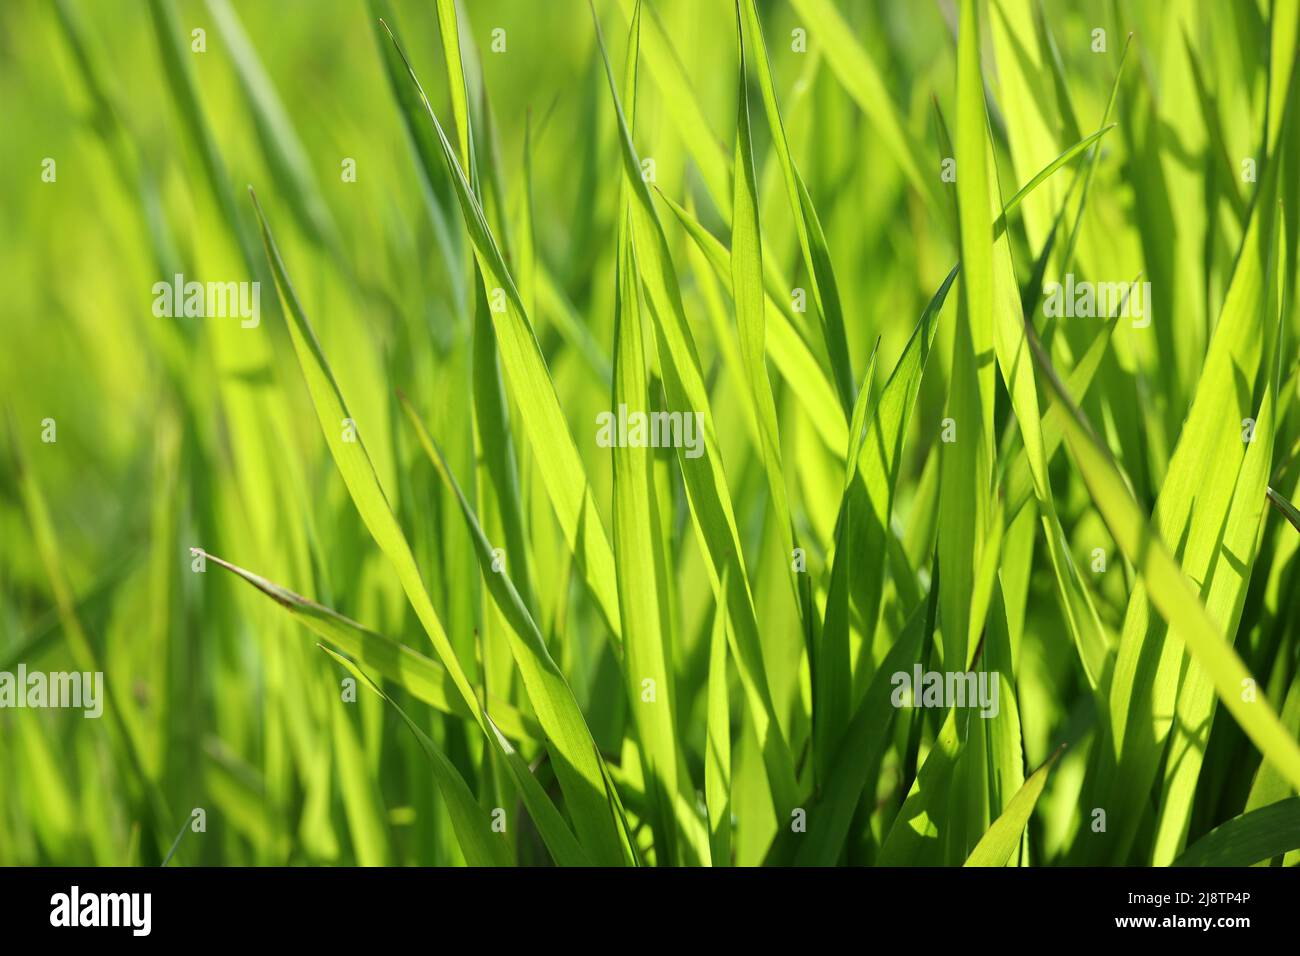 Light green grass in sunlight, blurred background. Fresh spring or summer nature, sunny meadow Stock Photo